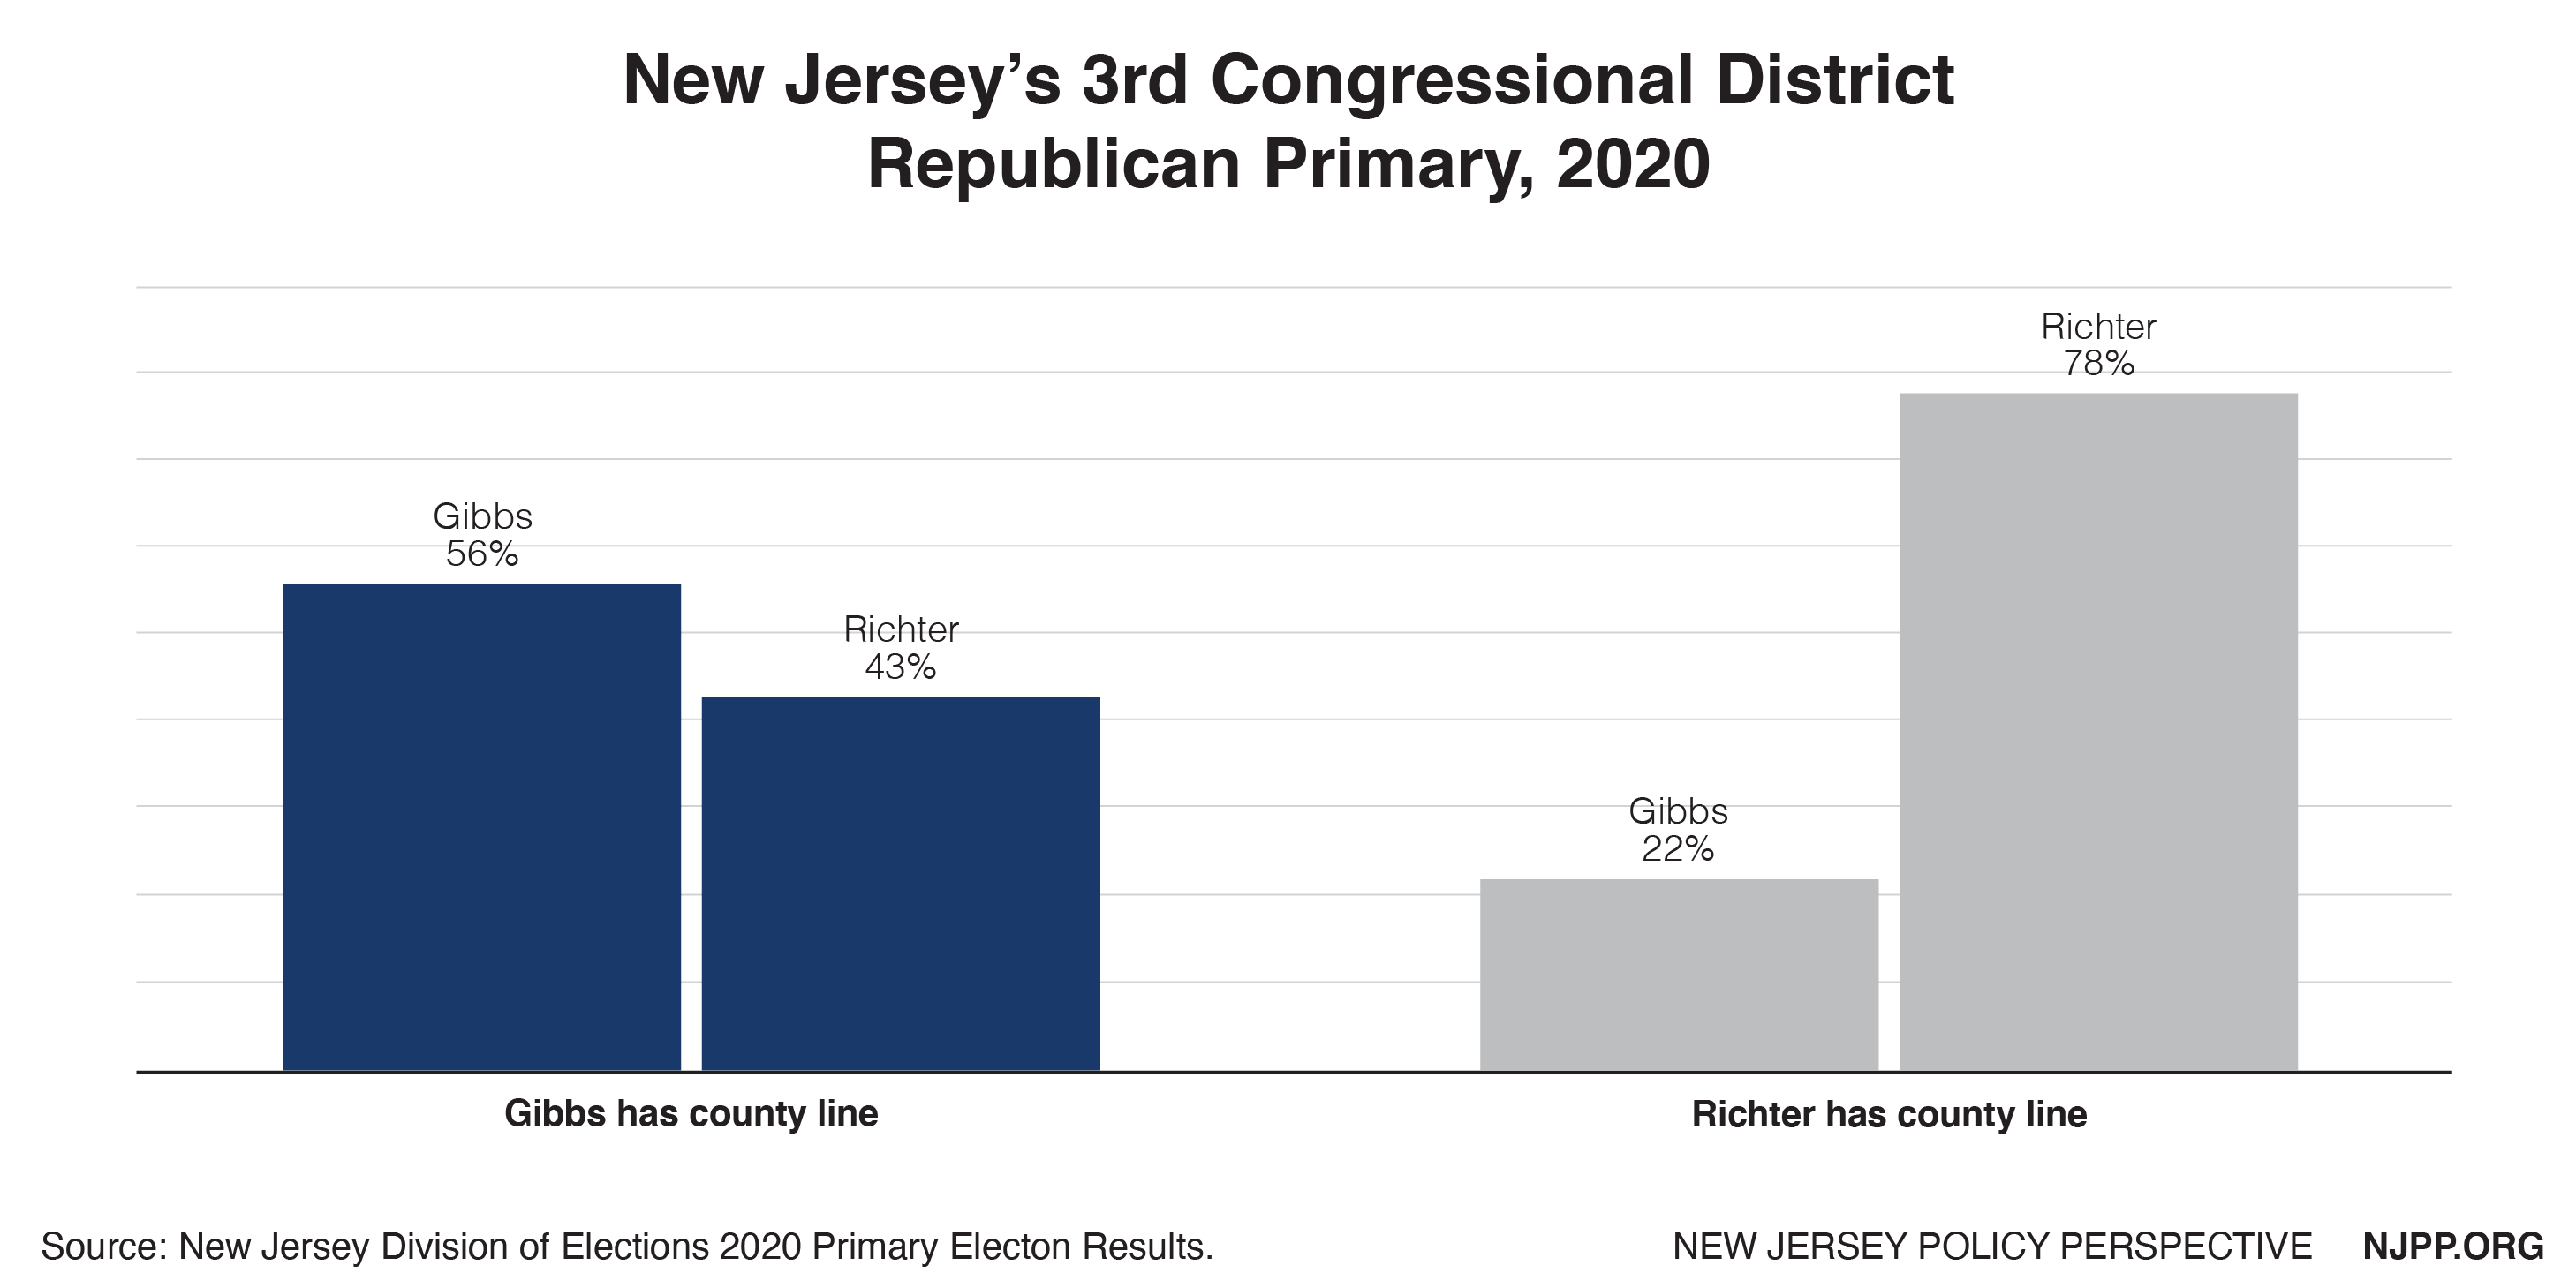 trompet Klasseværelse rent faktisk Does the County Line Matter? An Analysis of New Jersey's 2020 Primary  Election Results - New Jersey Policy Perspective